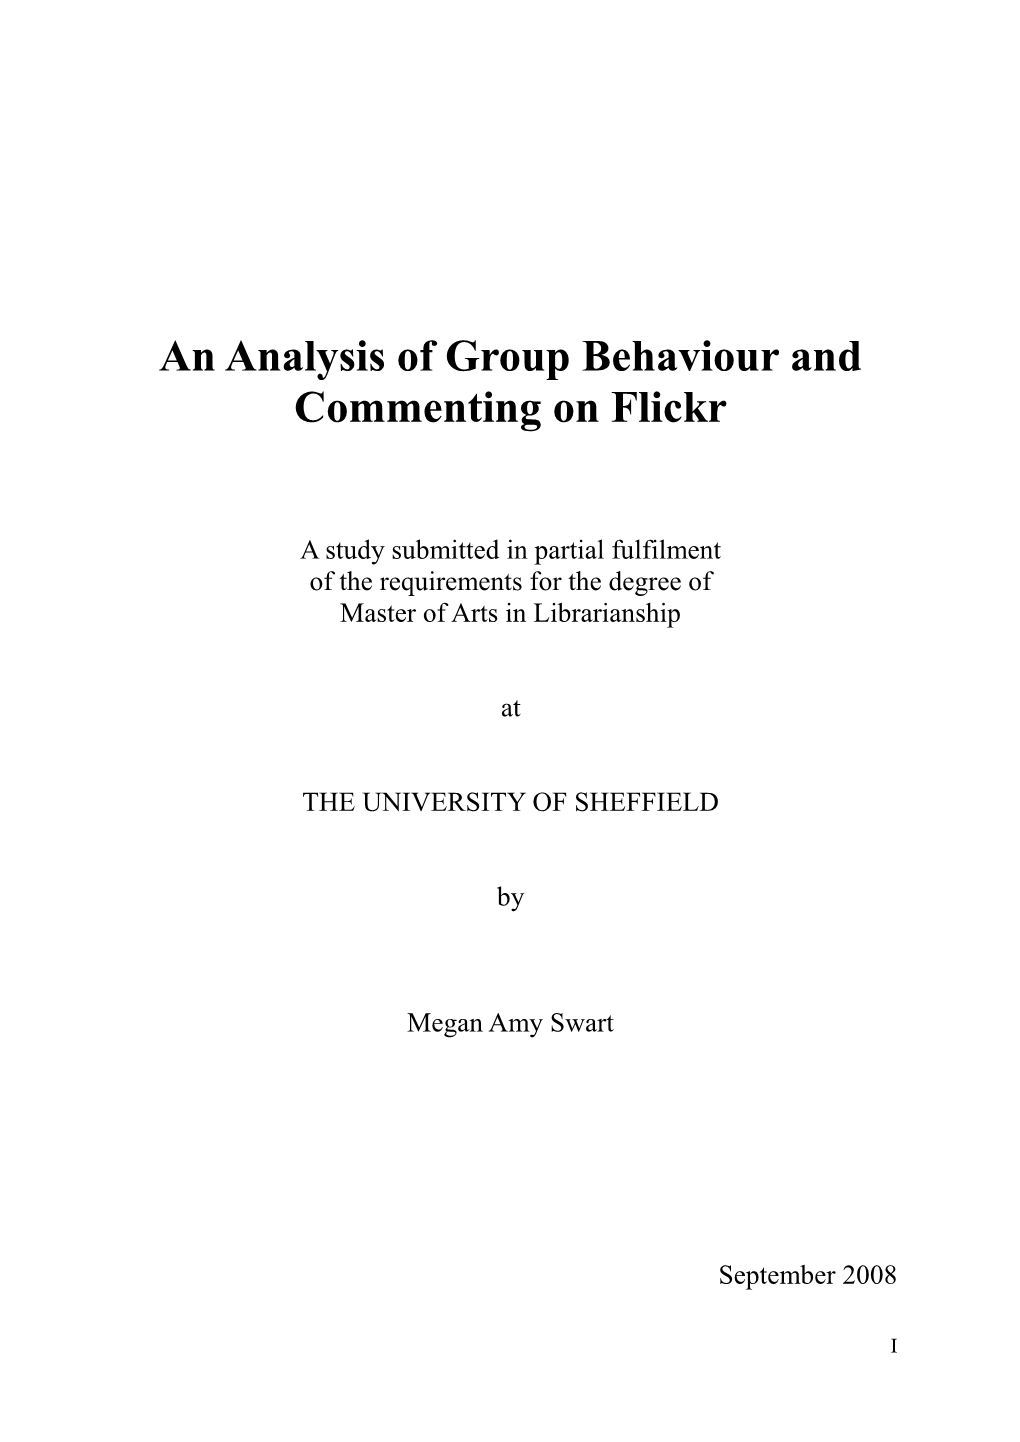 An Analysis of Group Behaviour and Commenting on Flickr